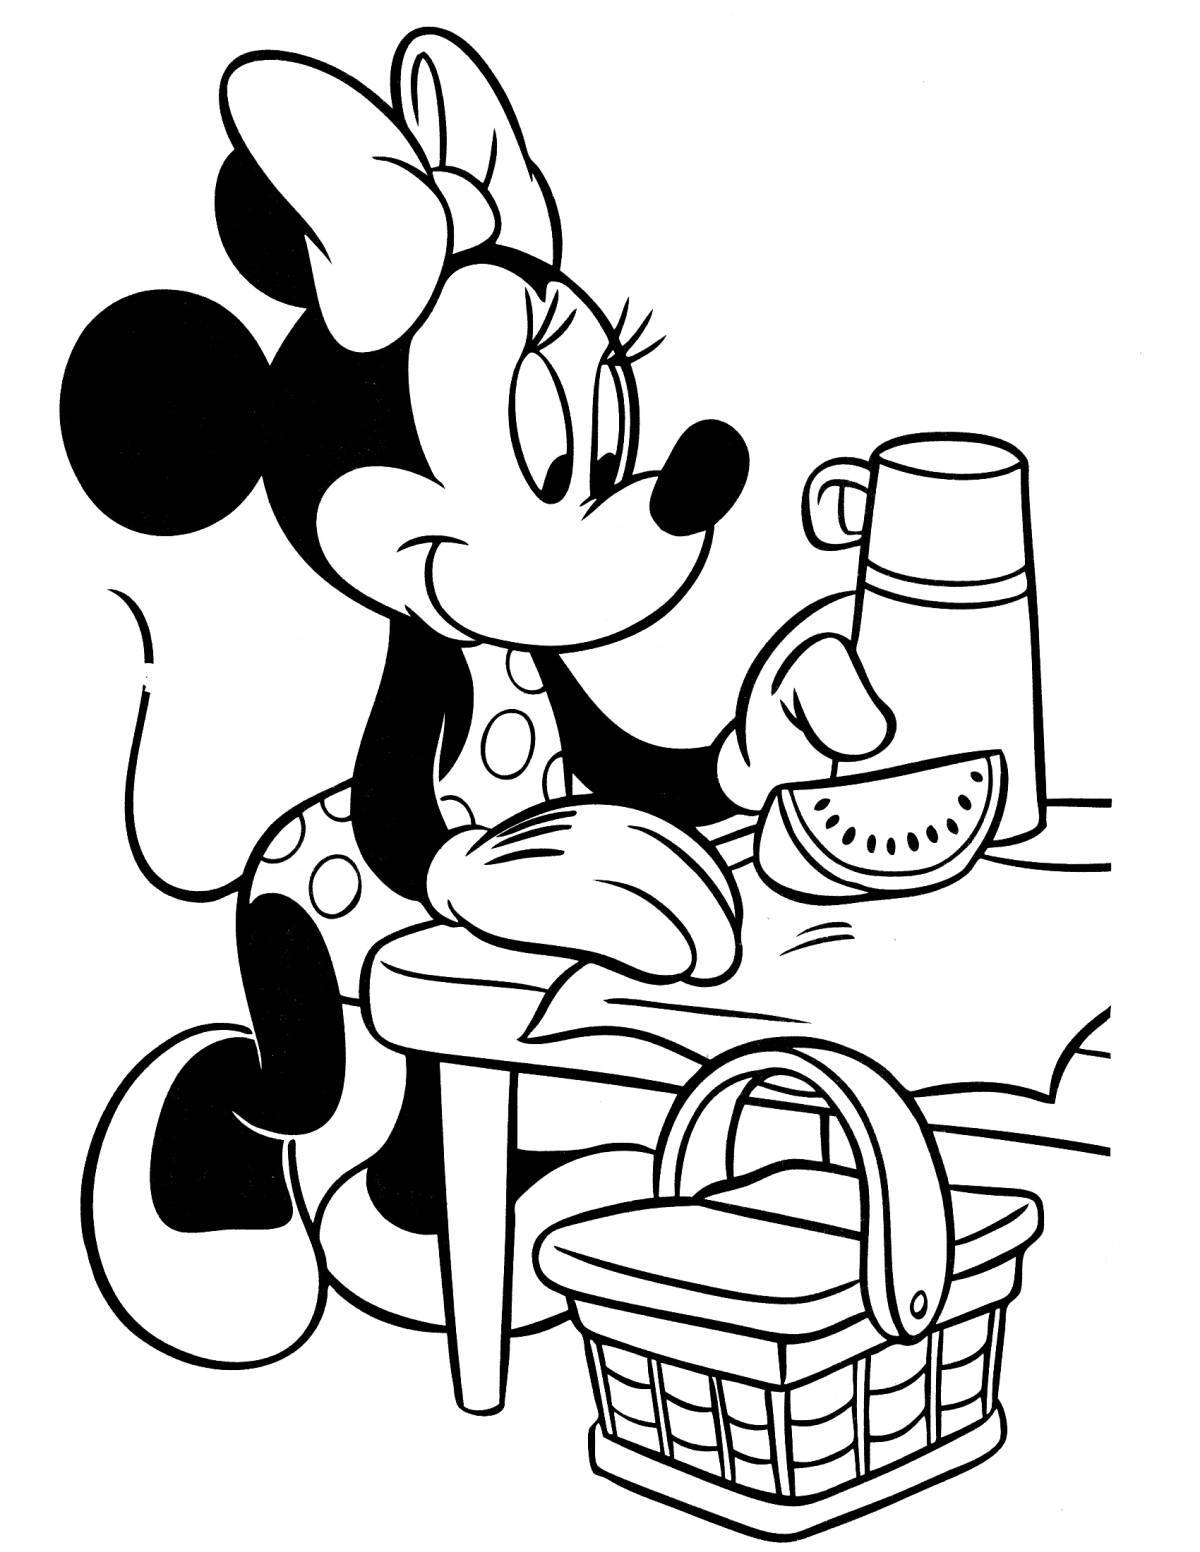 Coloring witty mickey mouse